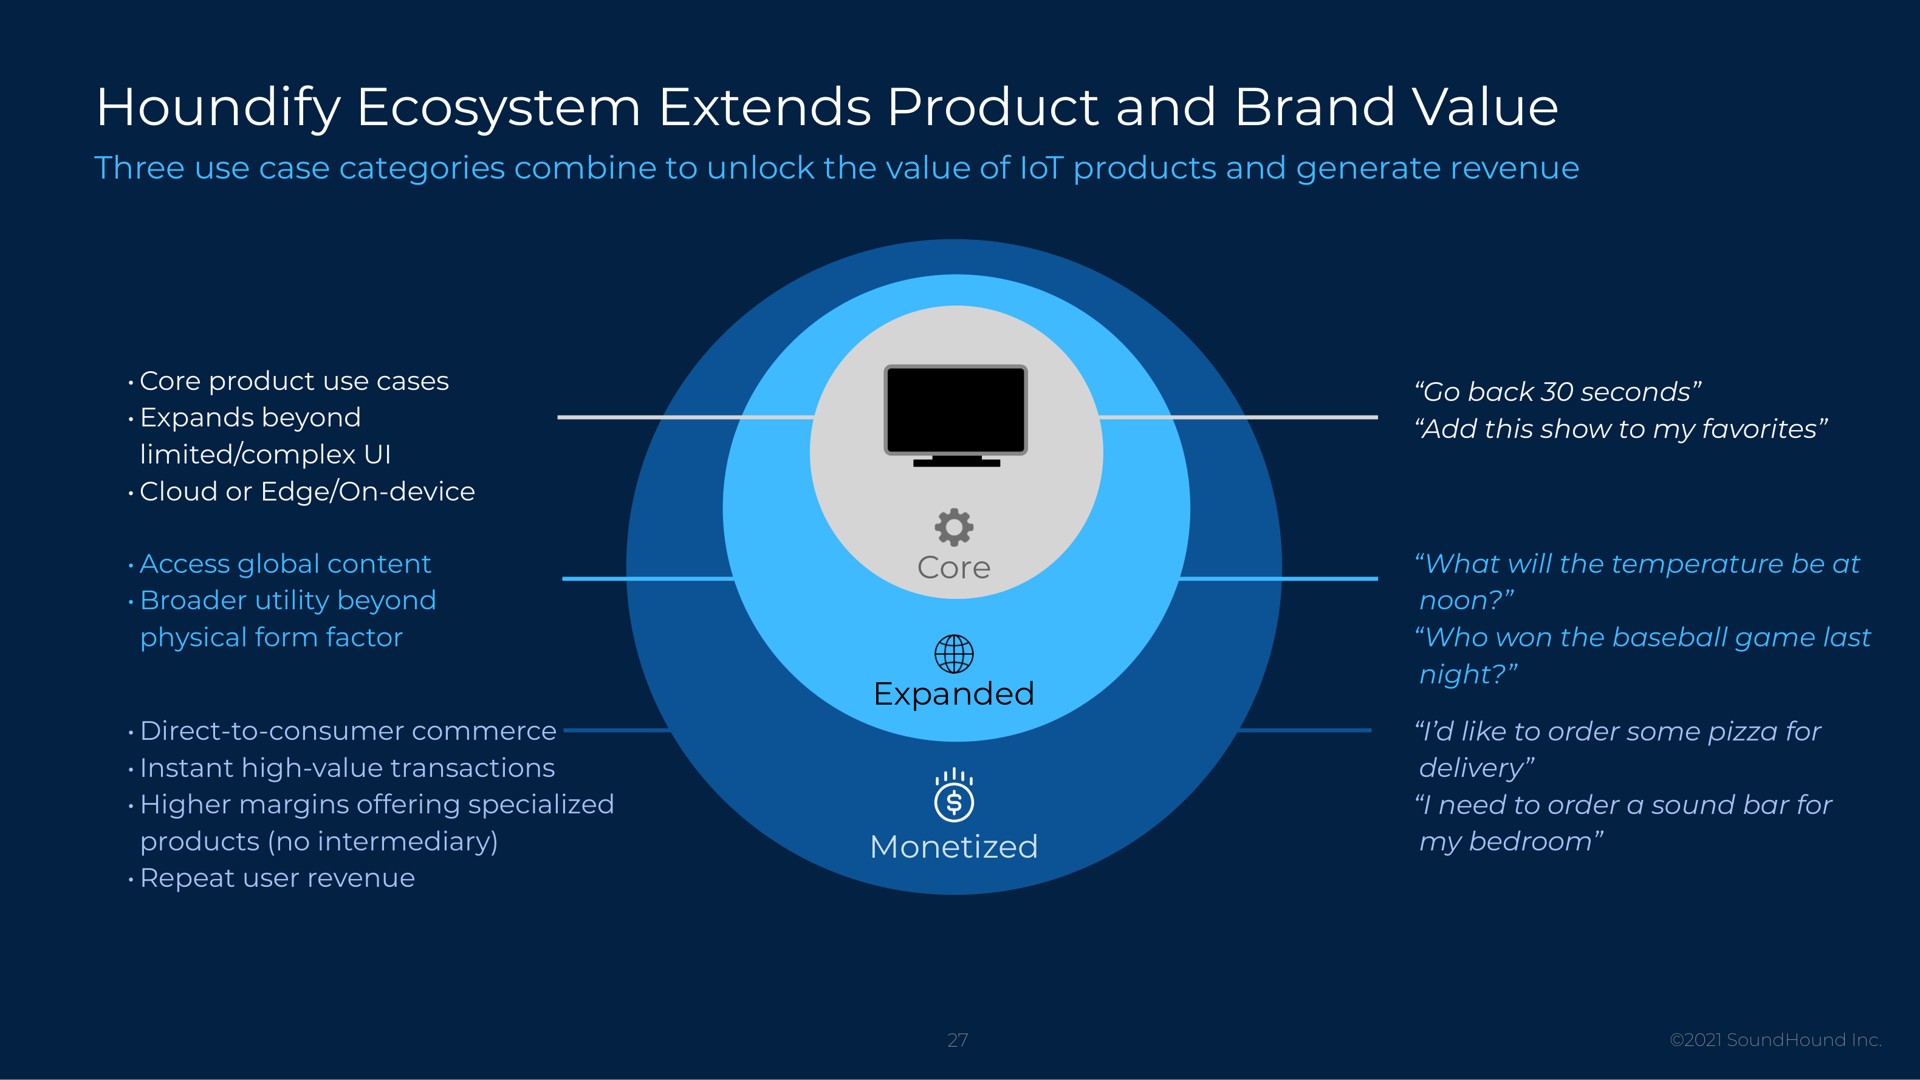 ecosystem extends product and brand value | SoundHound